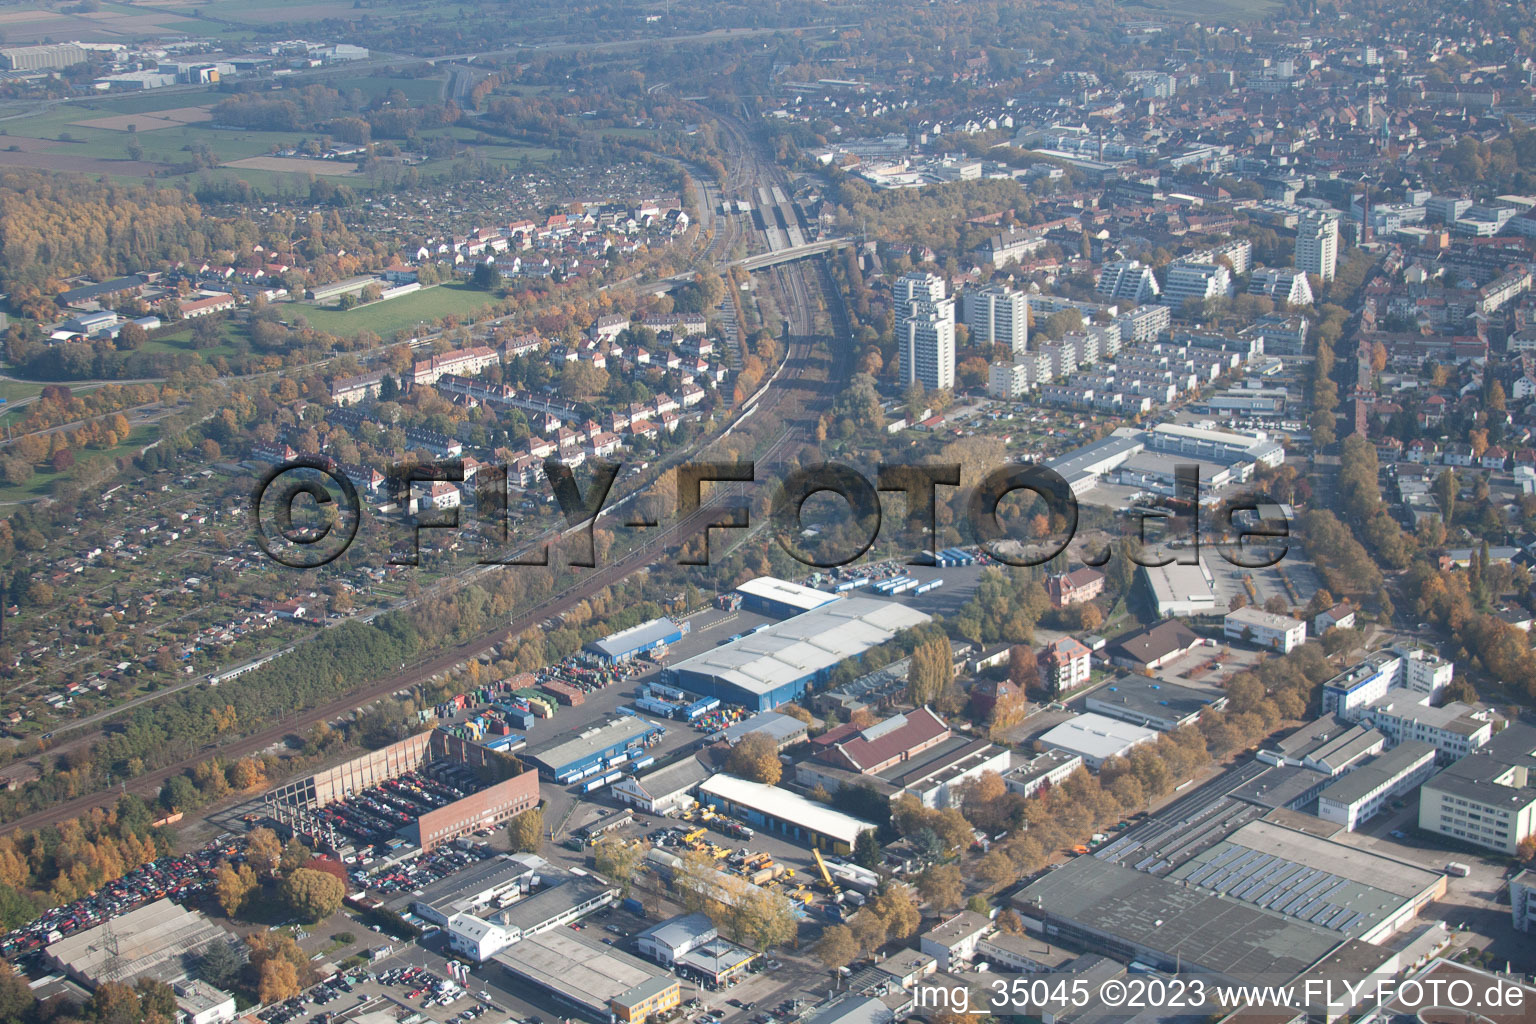 Bird's eye view of District Durlach in Karlsruhe in the state Baden-Wuerttemberg, Germany